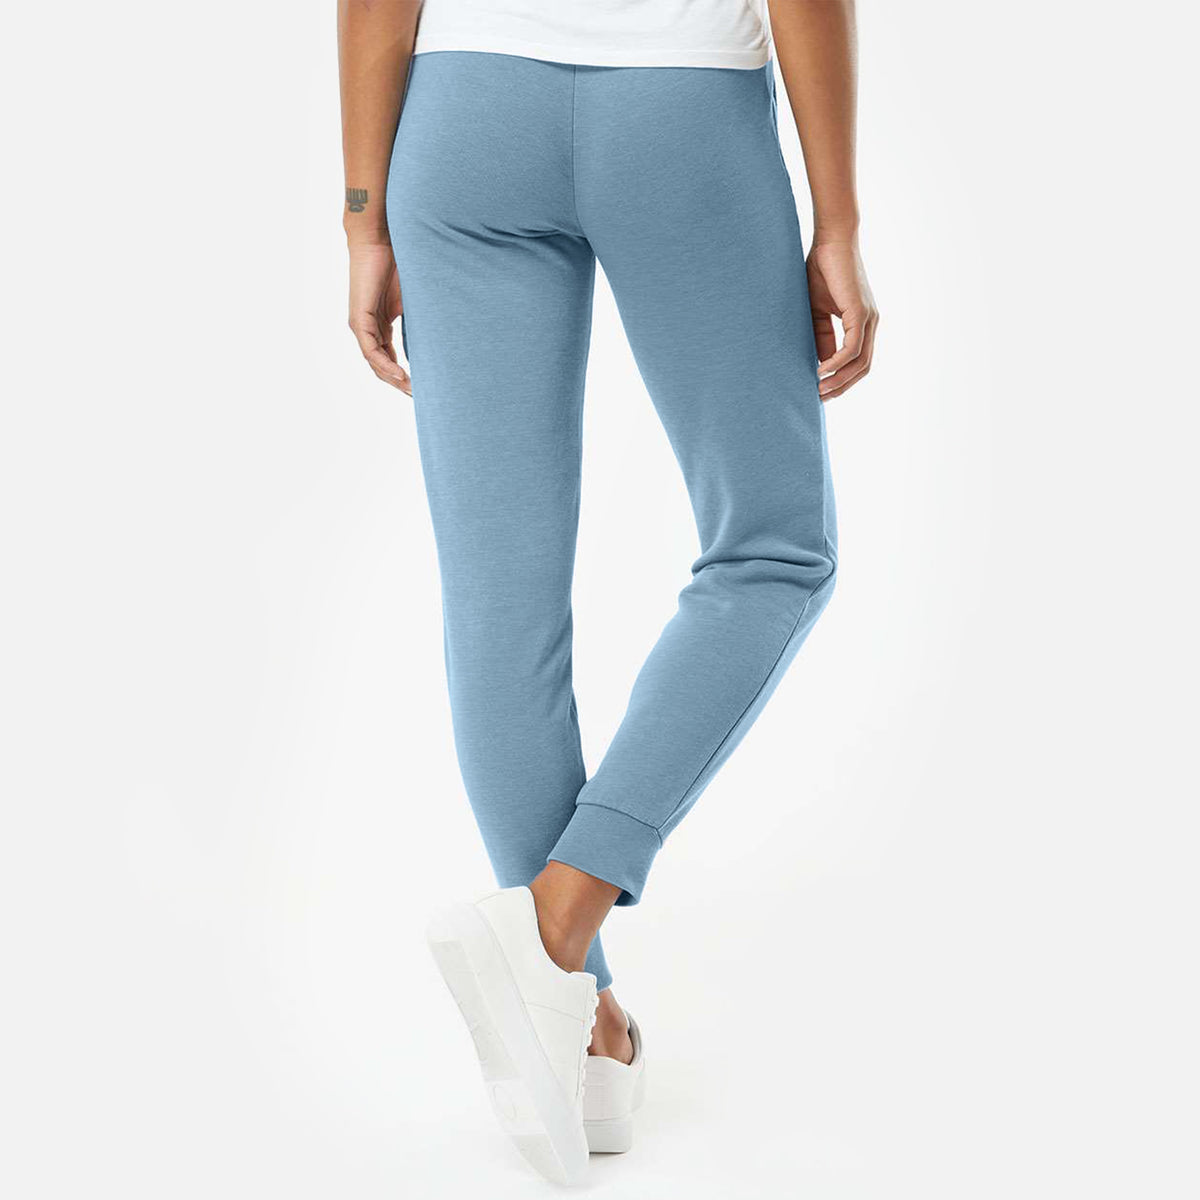 Save the Native Bees - Women&#39;s Cali Wave Jogger Sweatpants